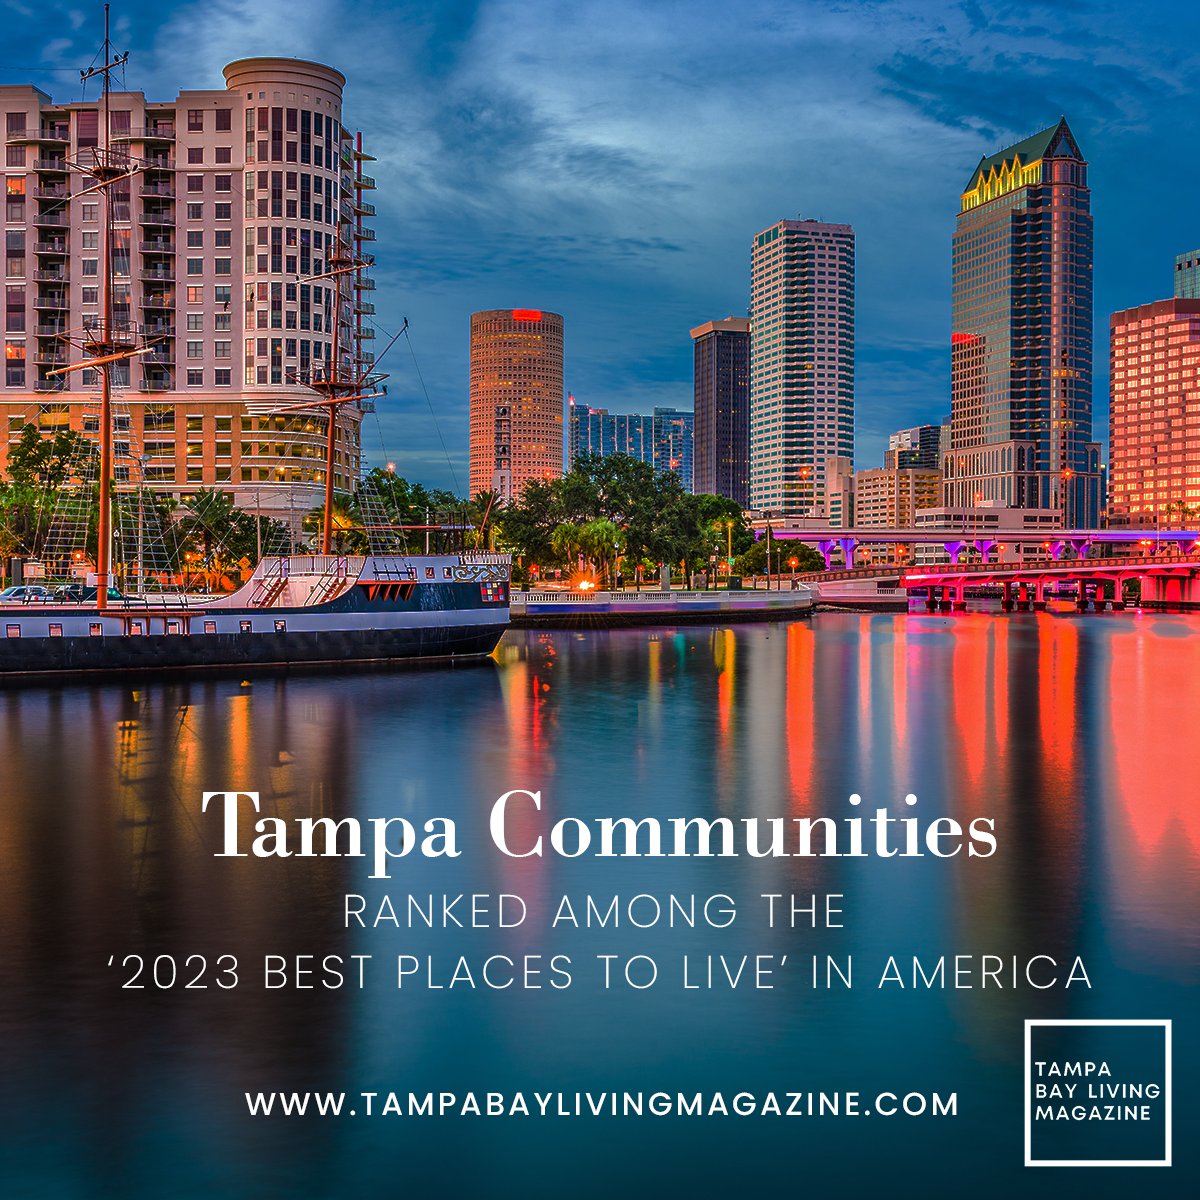 The review site Niche recently released its '2023 Best Places to Live' in America rankings, which include several #TampaBay neighborhoods. Full story: tampabaylivingmagazine.com/blog/tampa-com… #BestPlacestoLive